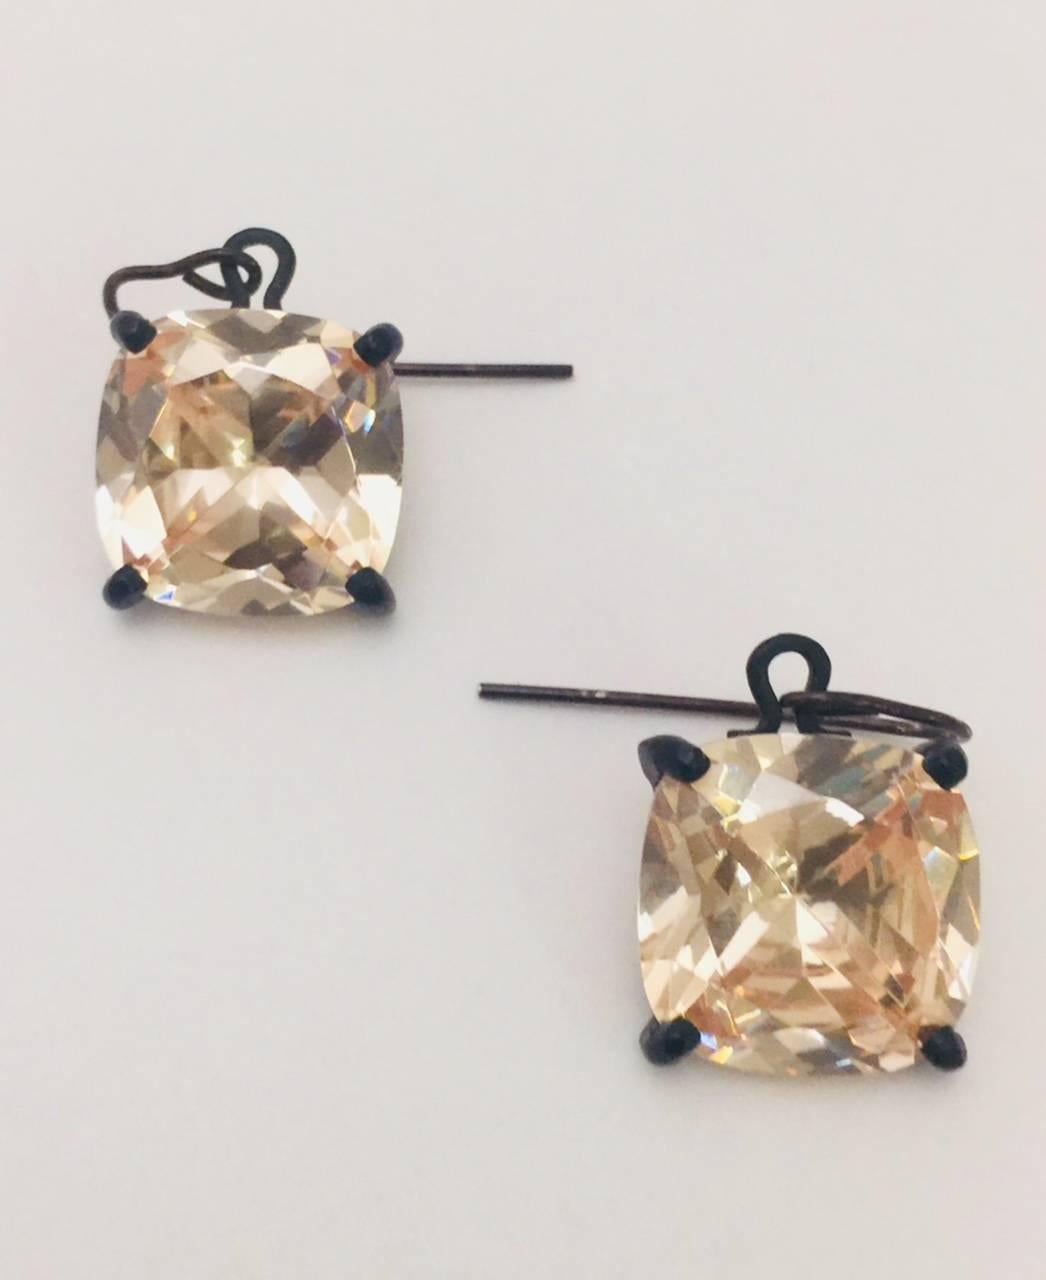 Bottega Veneta is more than handbags!  This stunning set begins with black rhodium sterling silver.  French back pierced earrings boast square faceted rose champagne cubic zirconias set in prongs.  Earrings measure 1/2